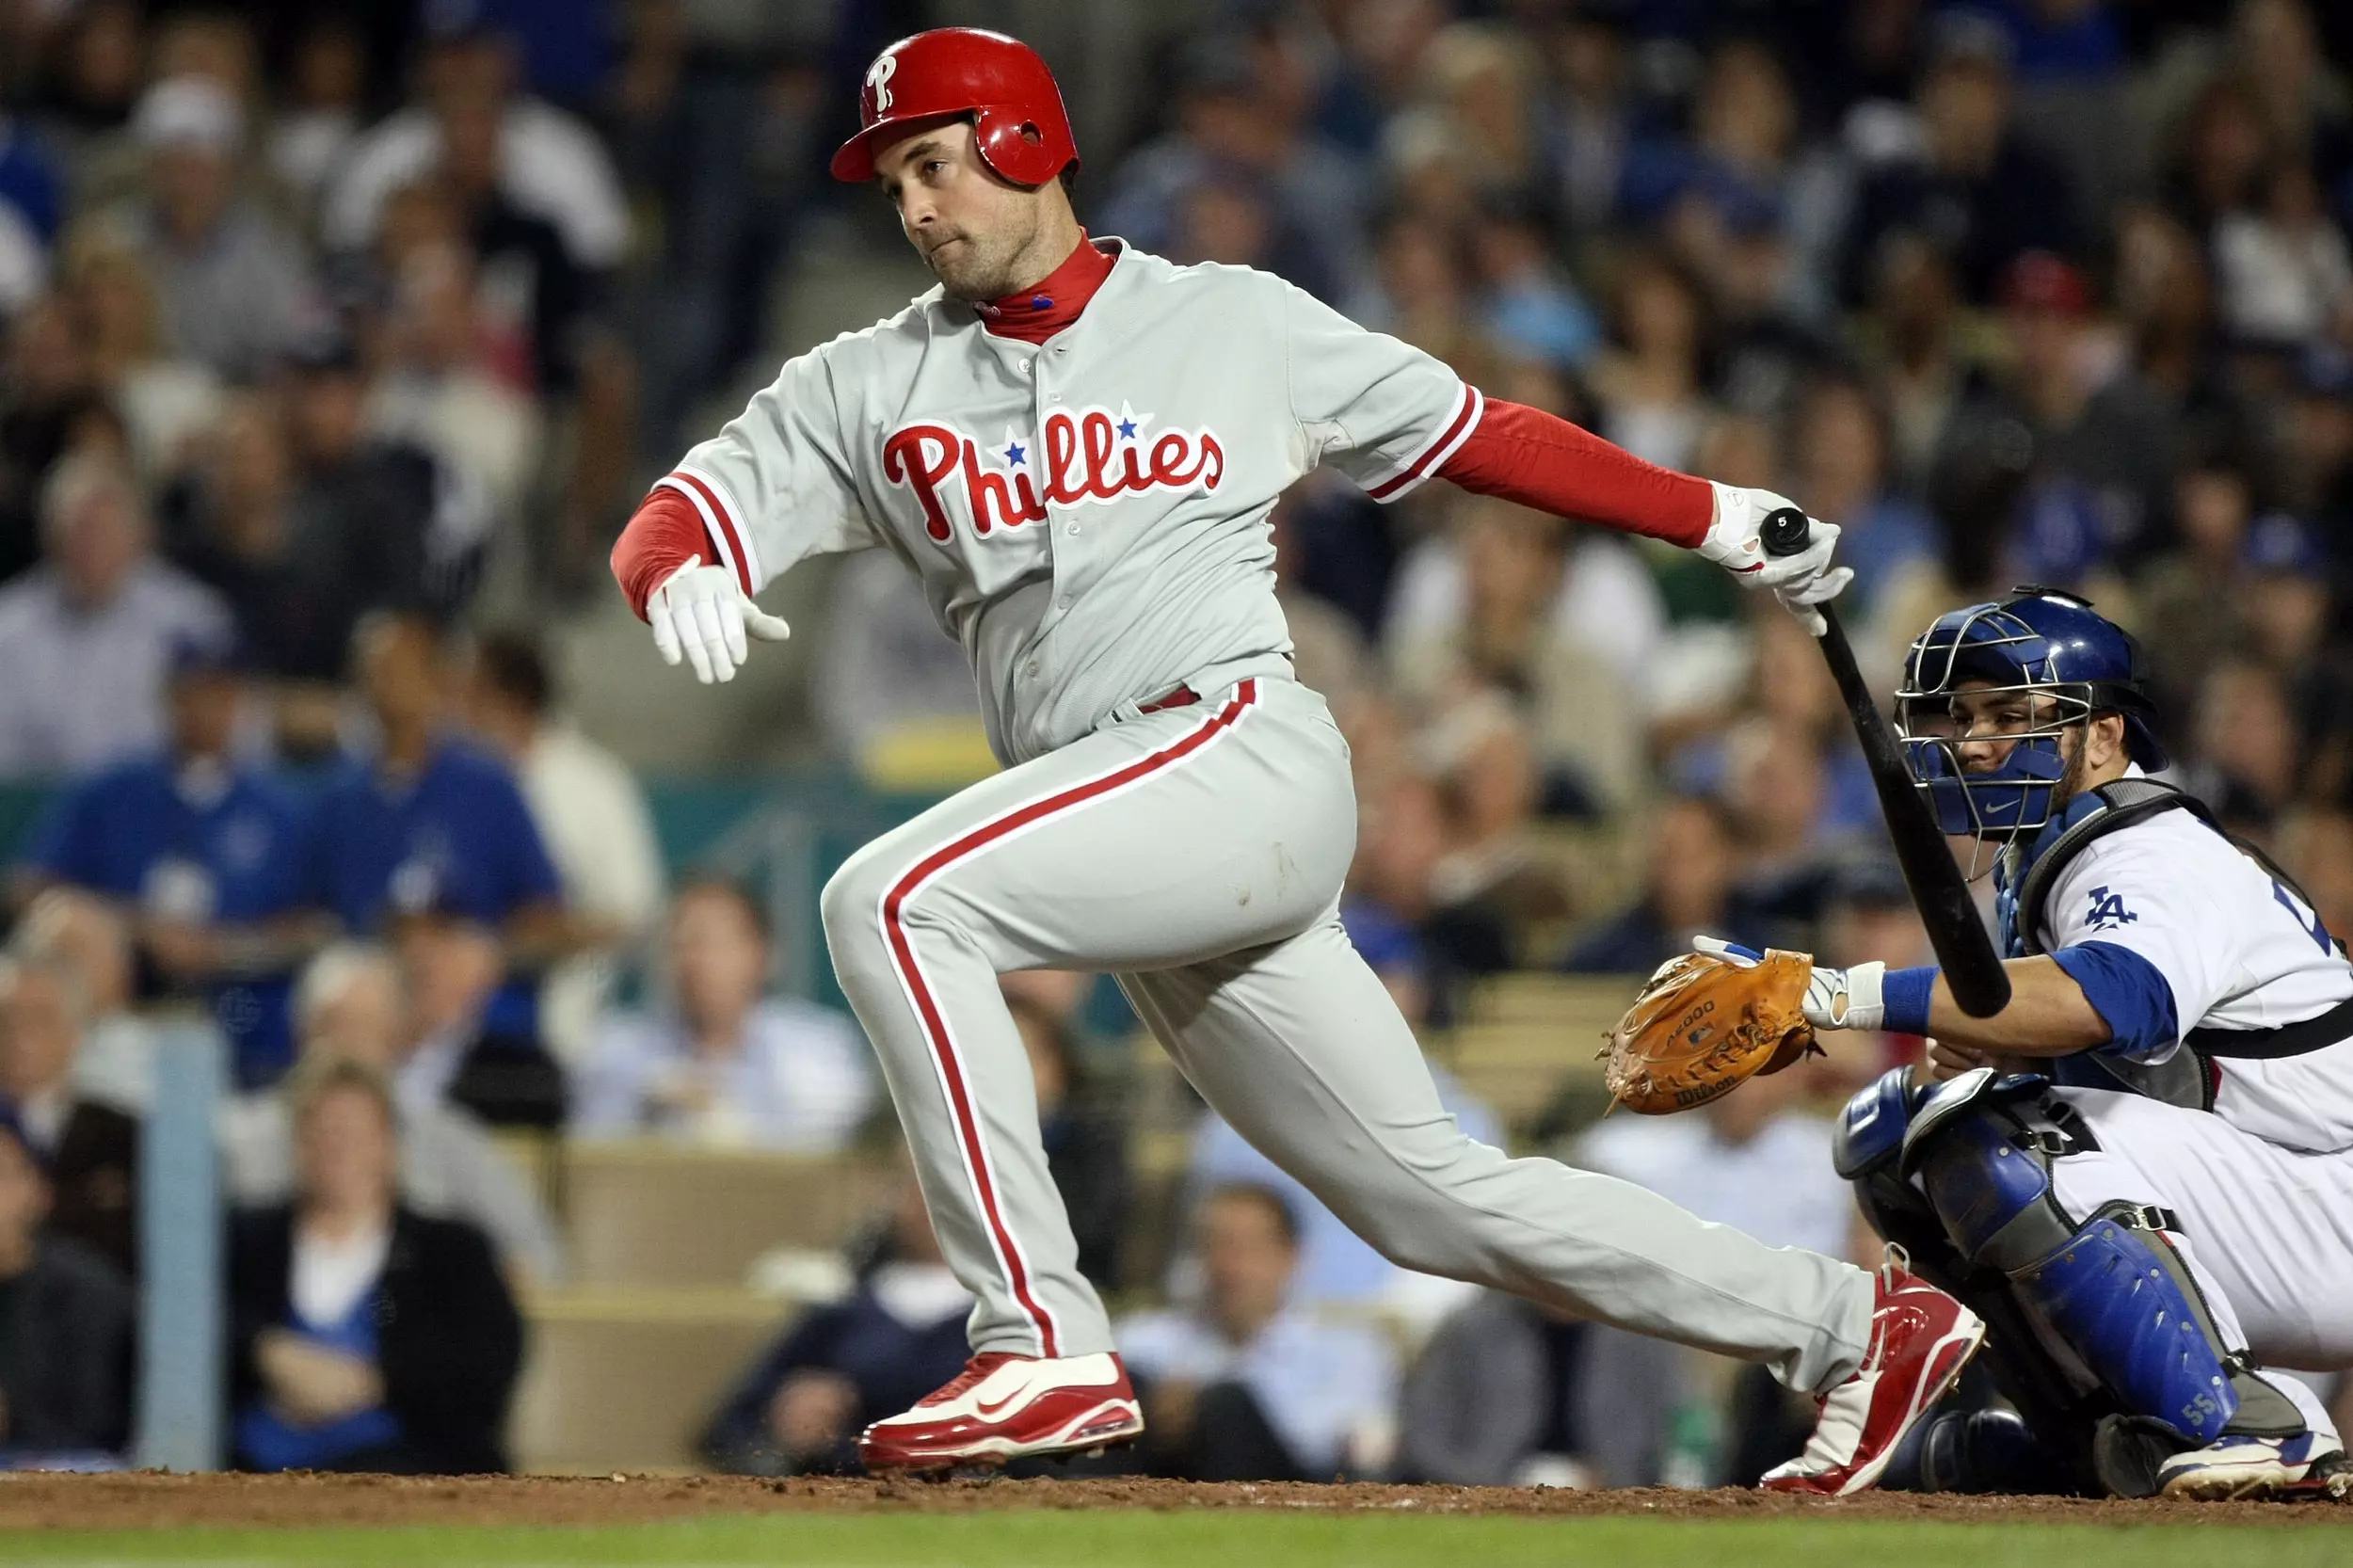 Watch former Phillie Pat Burrell wipe out on a wakeboard